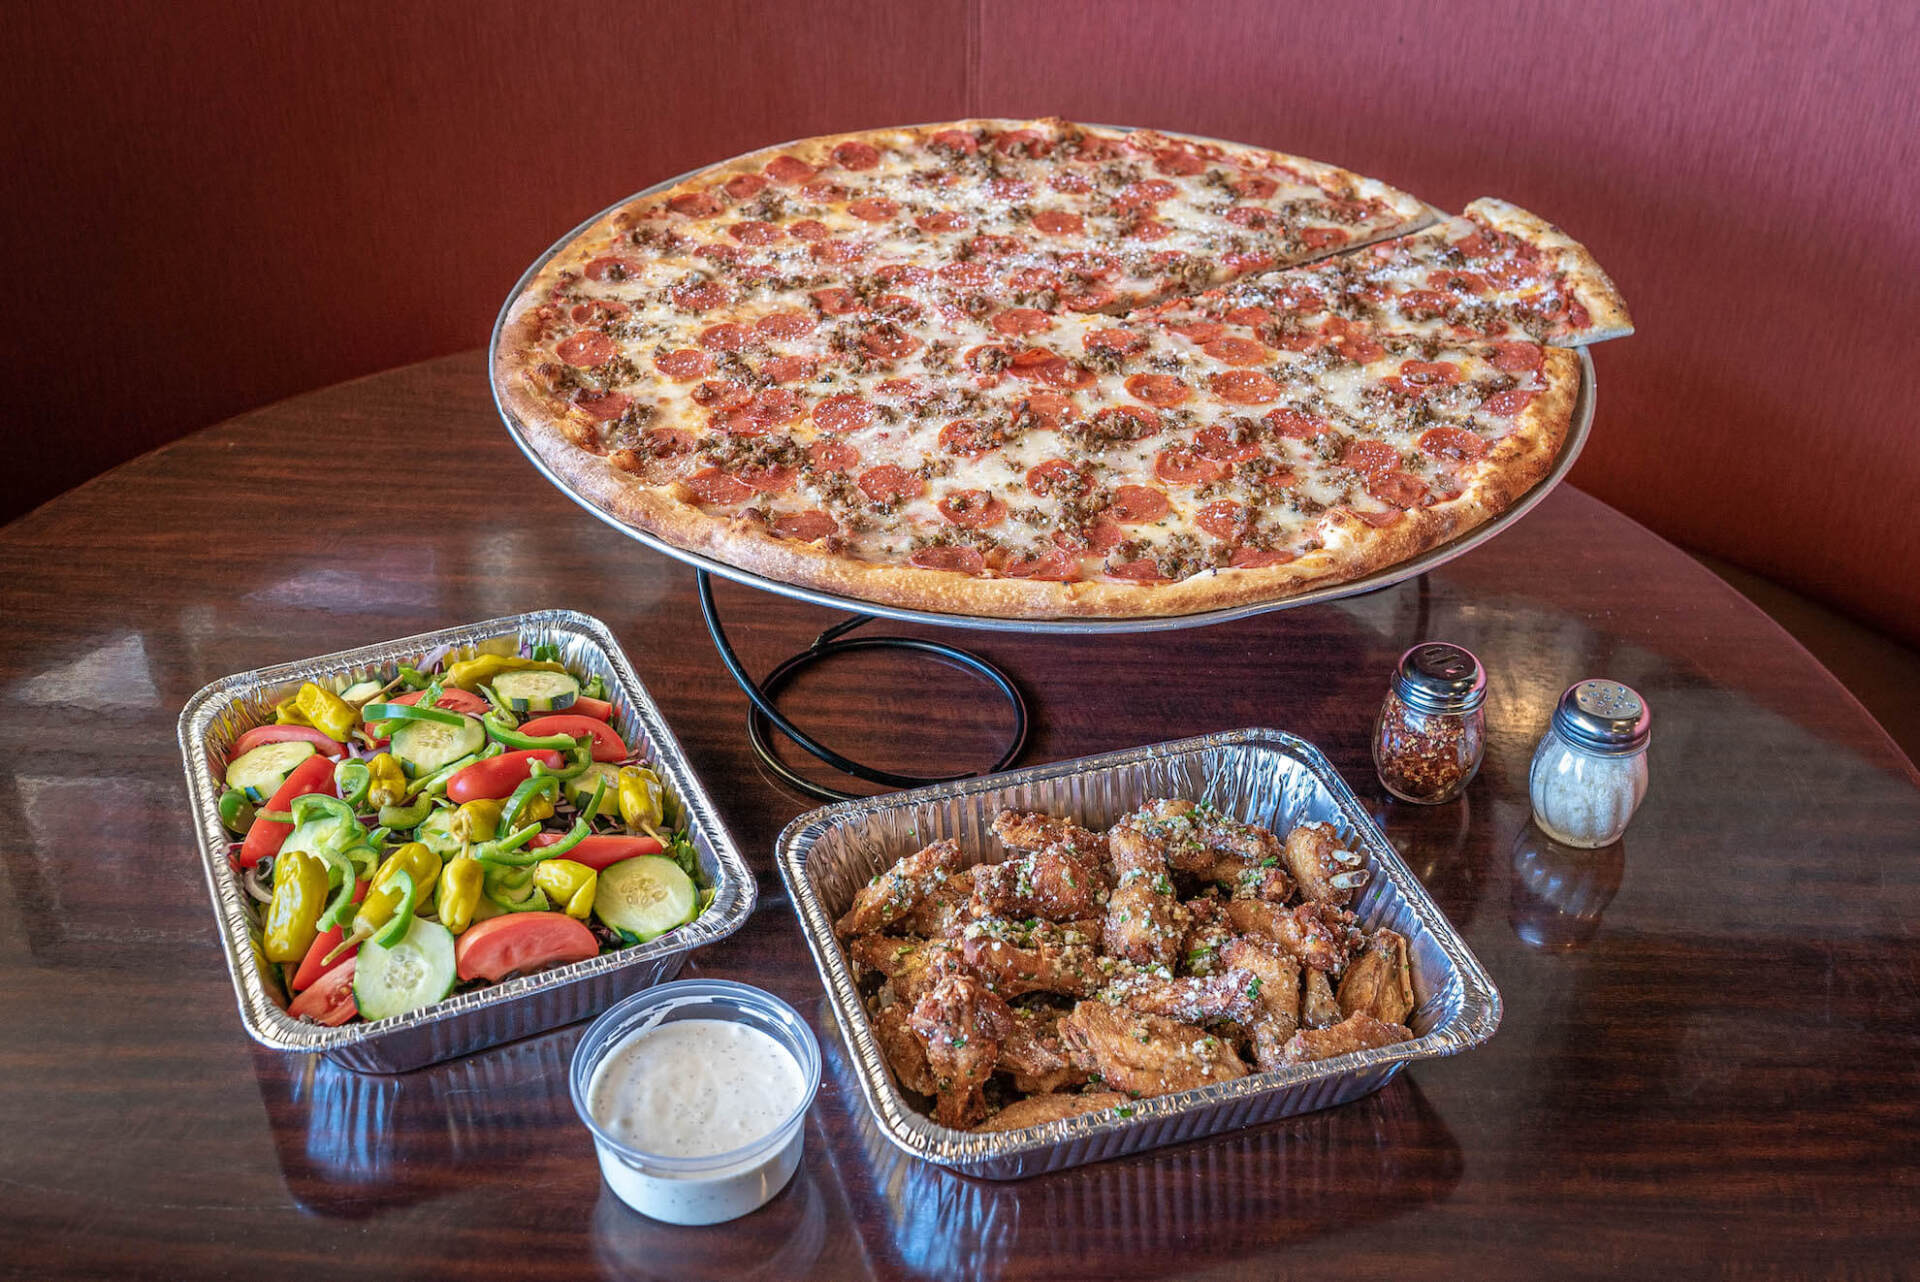 #4 Napoli | Party Pizza, Wings, & Salad (Serves 10-15)